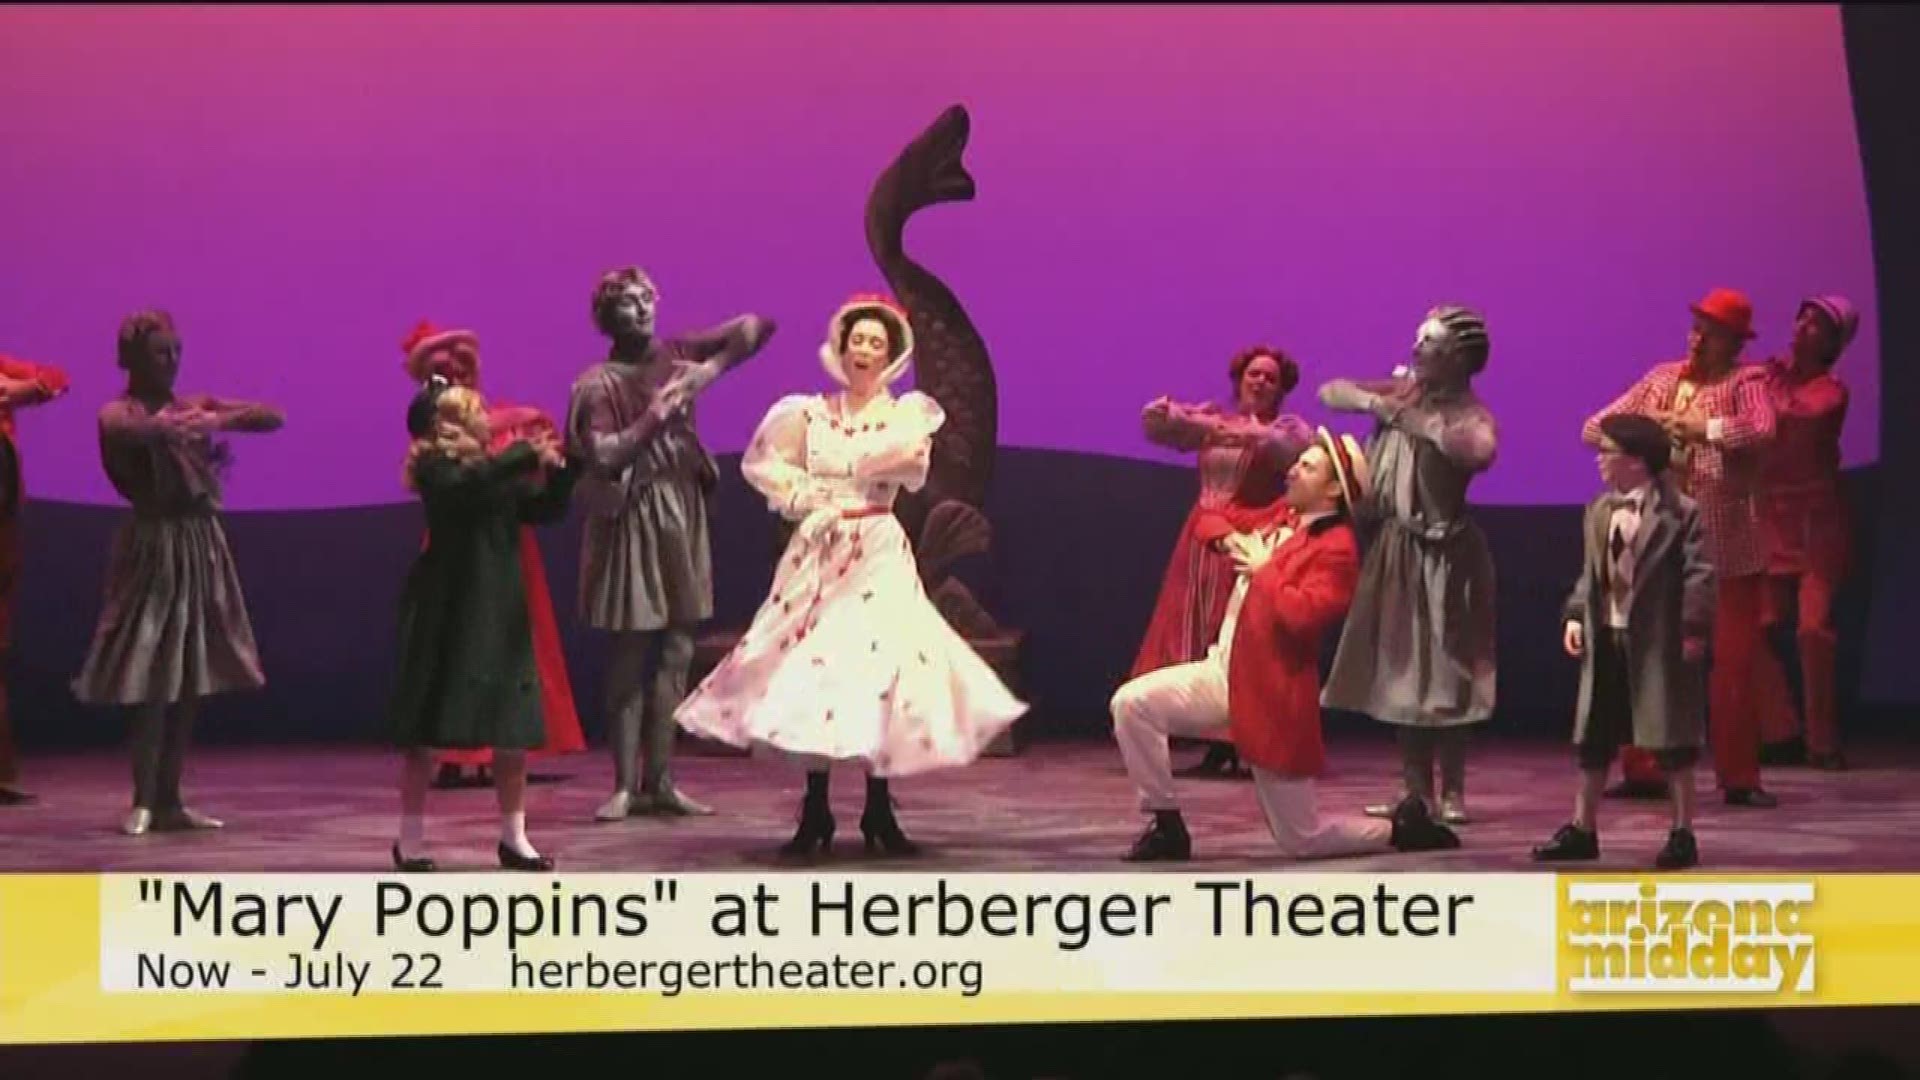 We stopped by the Herberger Theatre and caught up with Mary Poppins and chatted about her musical.